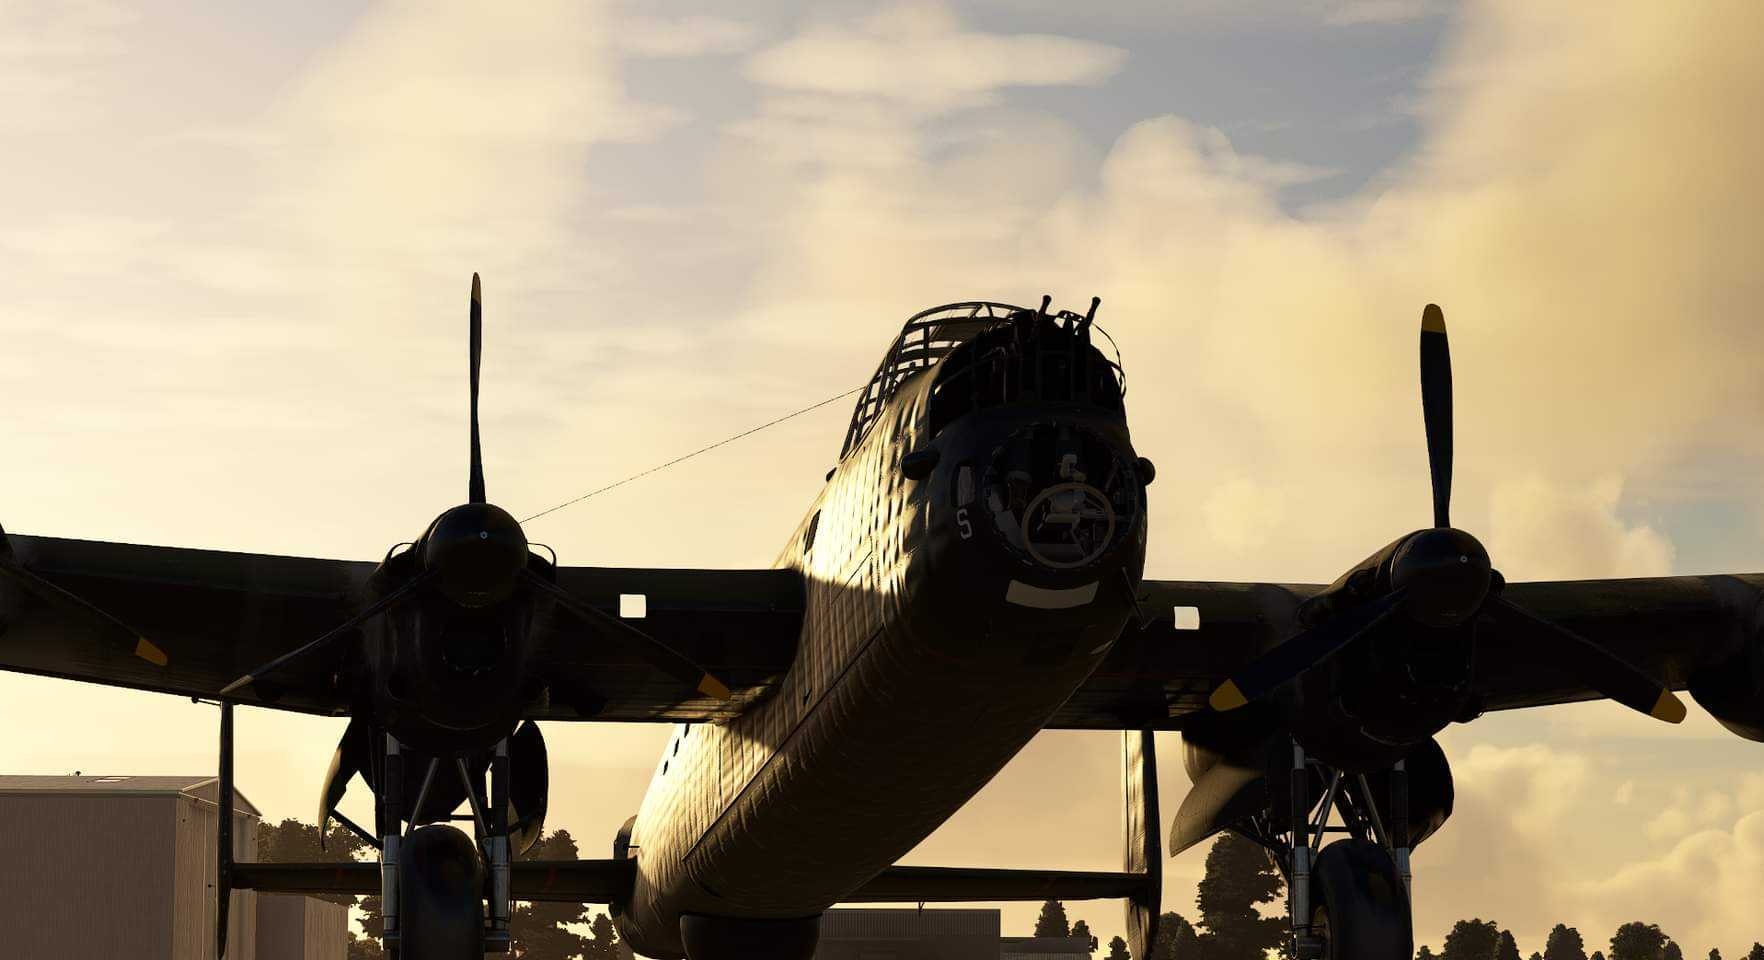 Aeroplane Heaven Avro Lancaster Preview (Updated)